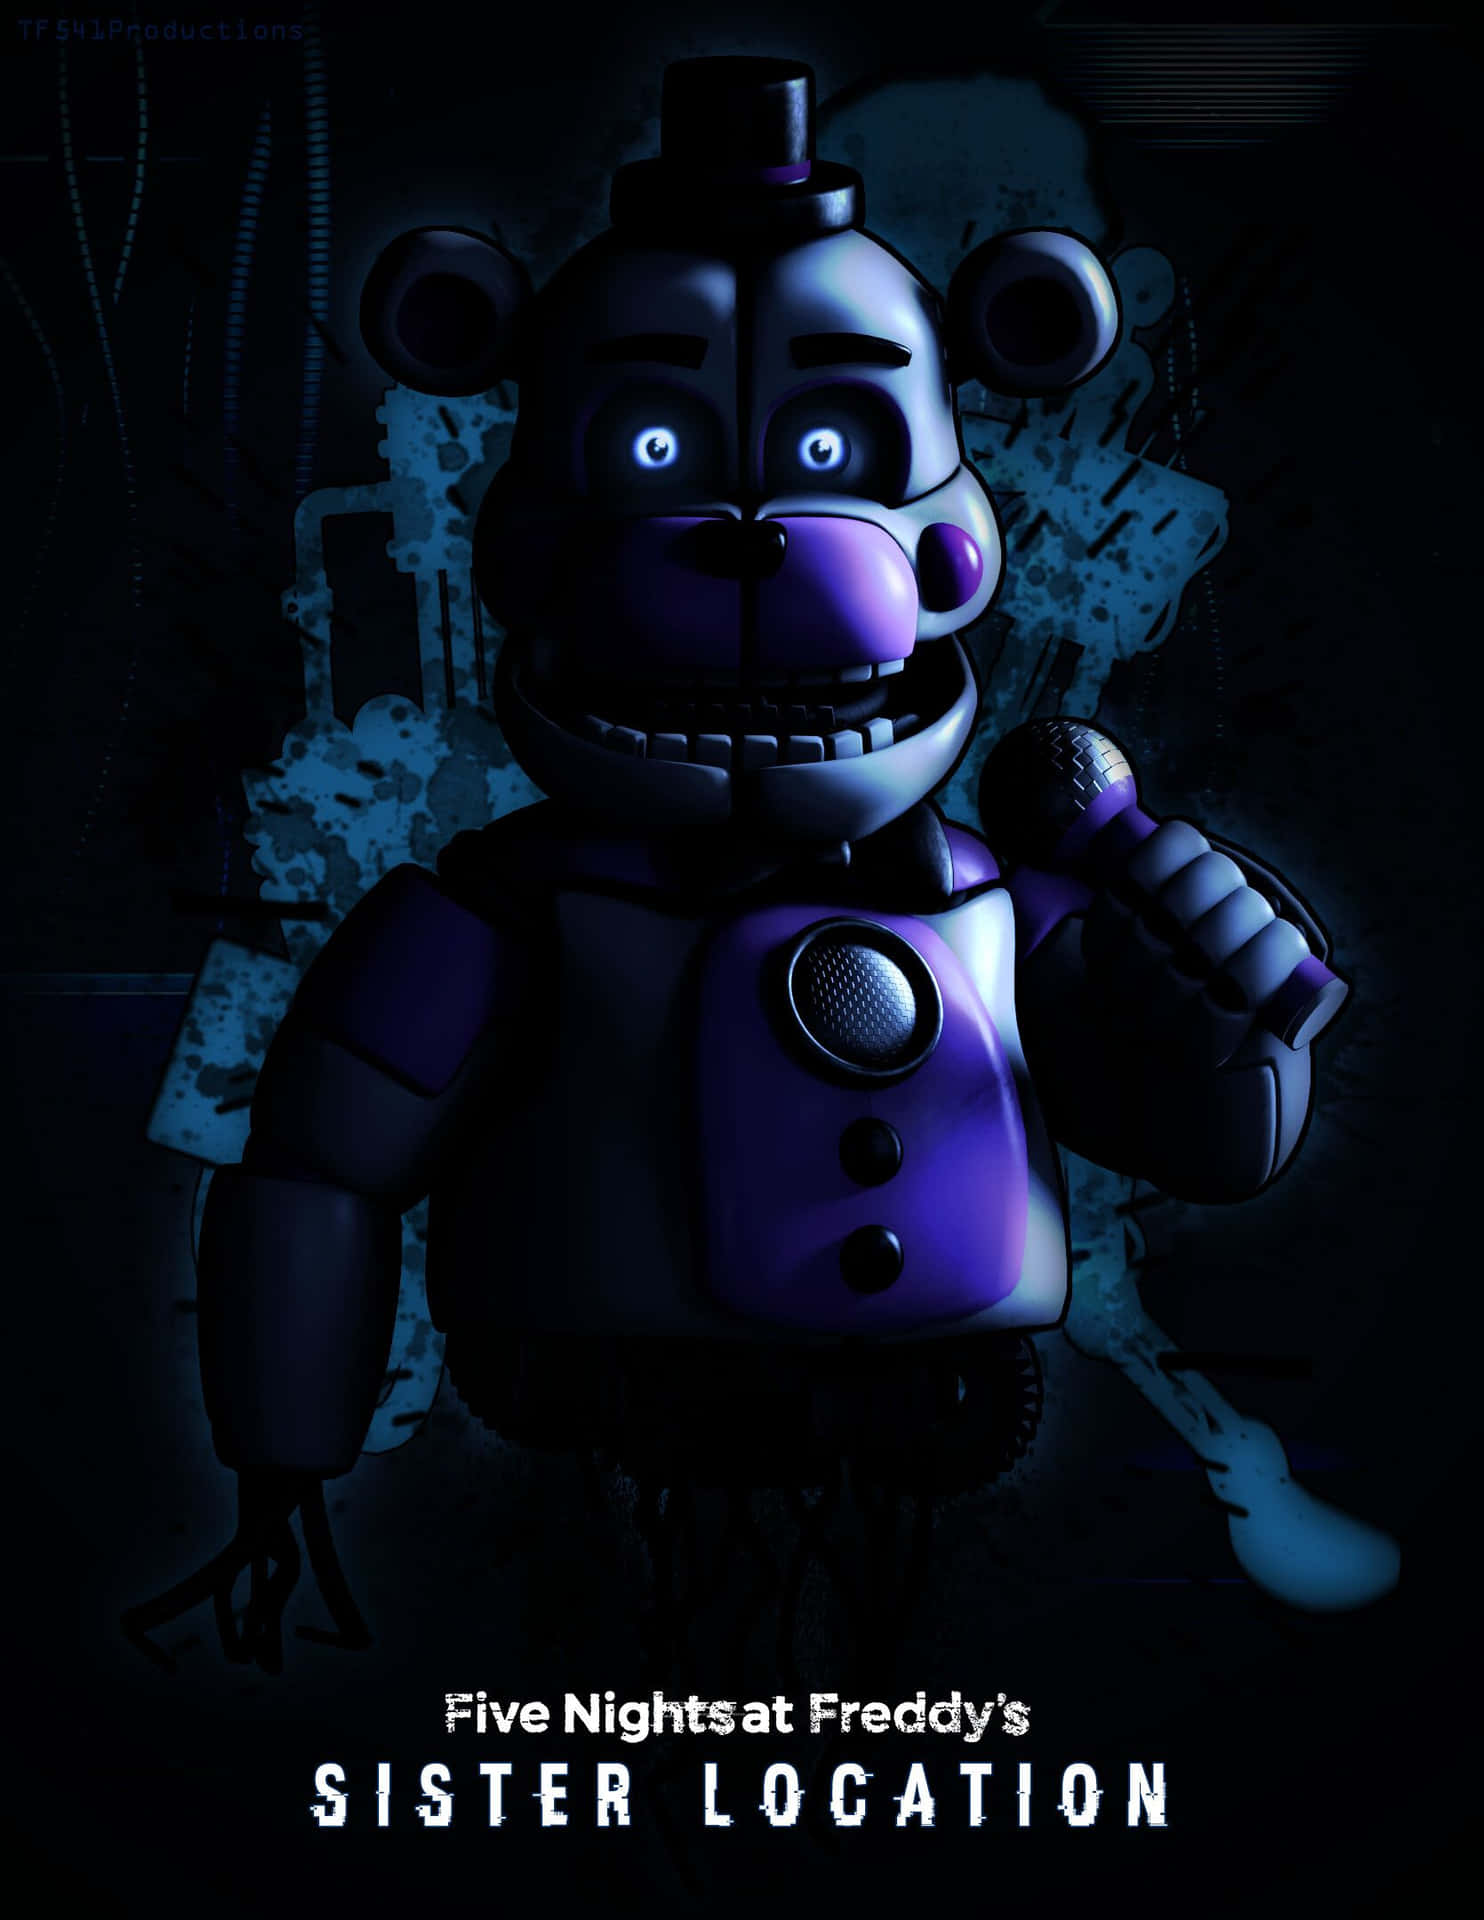 Enjoy the thrilling gaming with Five Nights At Freddys on your Iphone Wallpaper